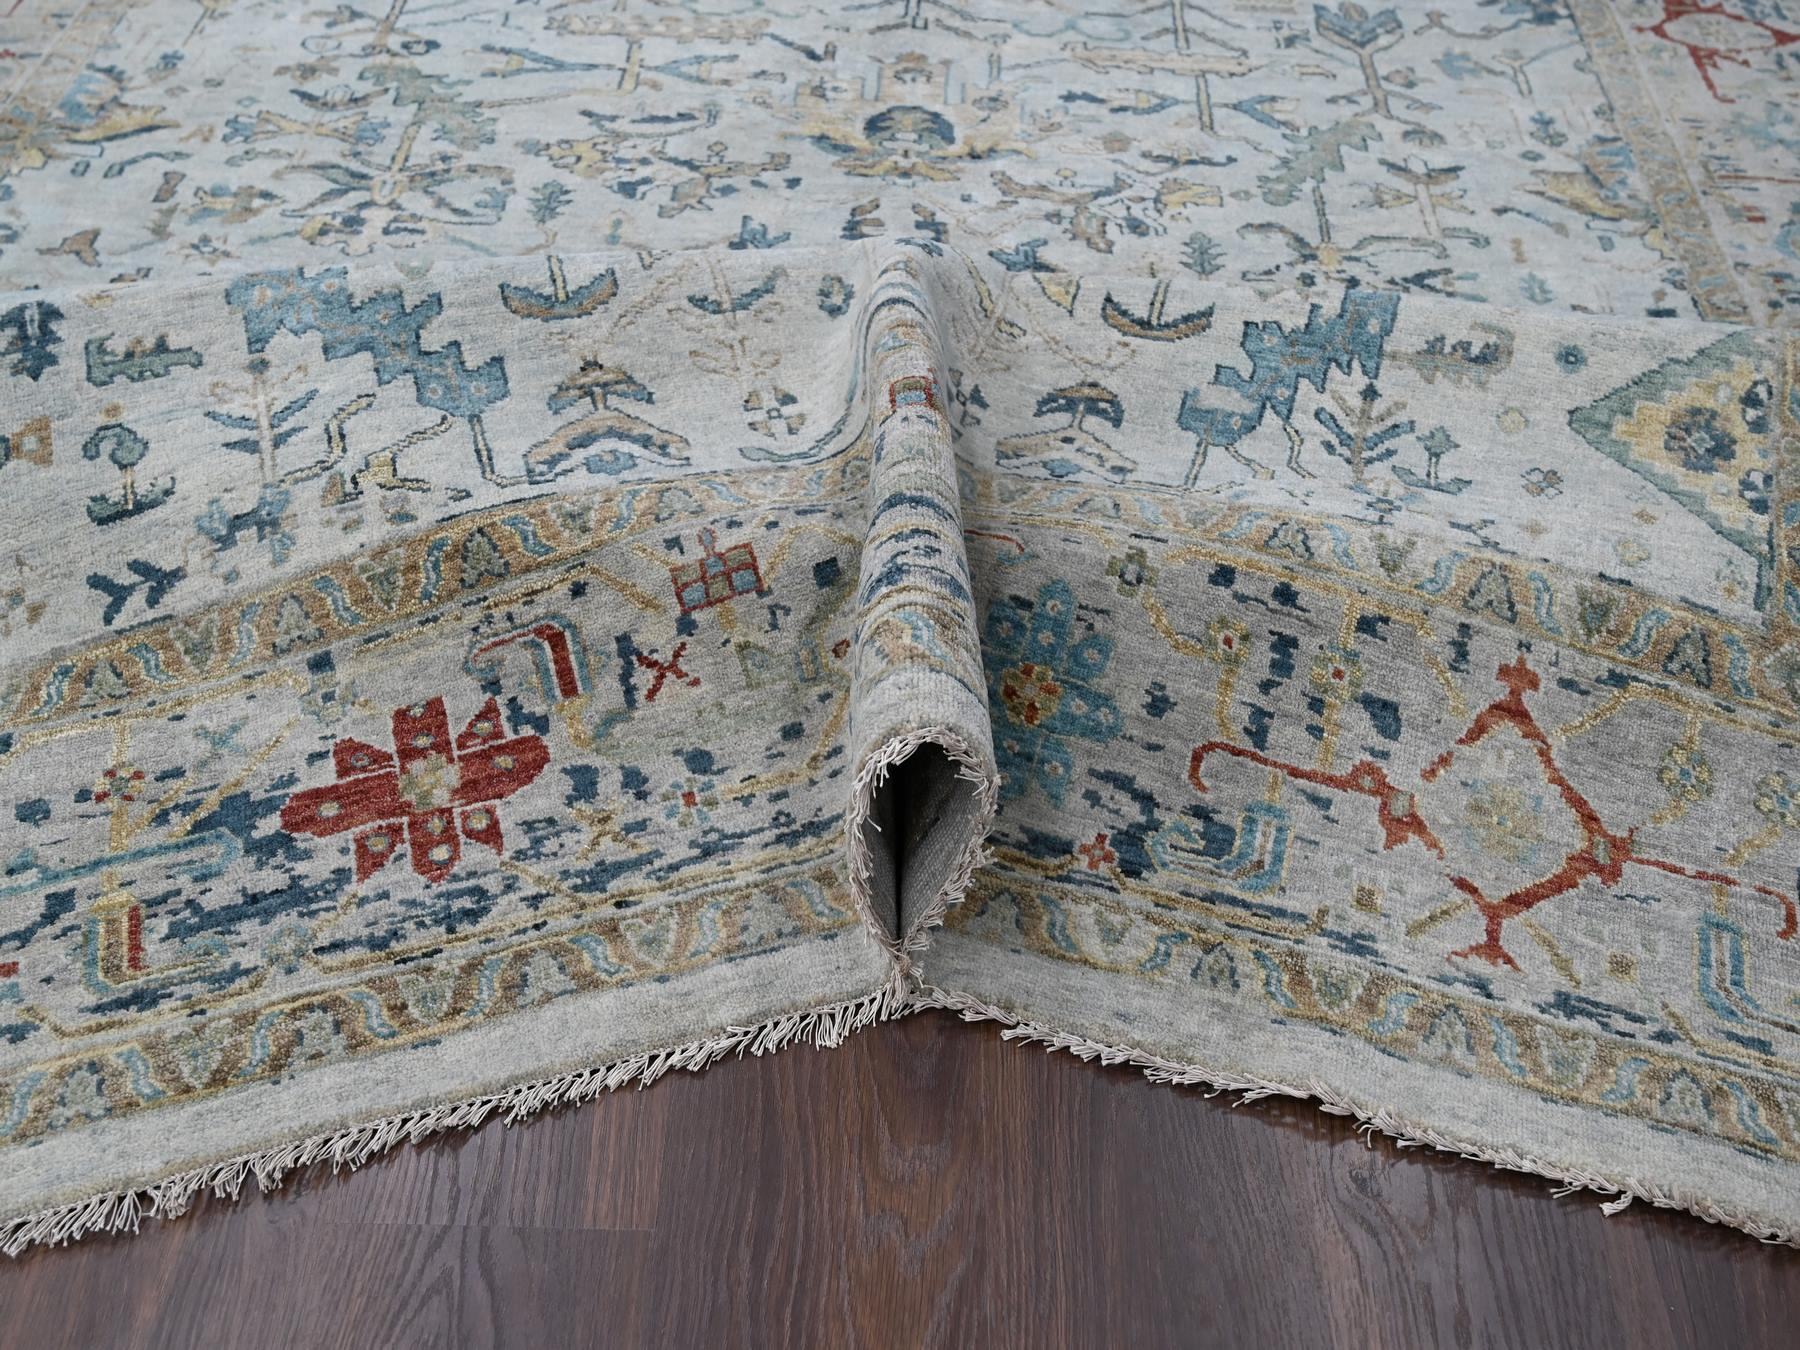 TransitionalRugs ORC757134